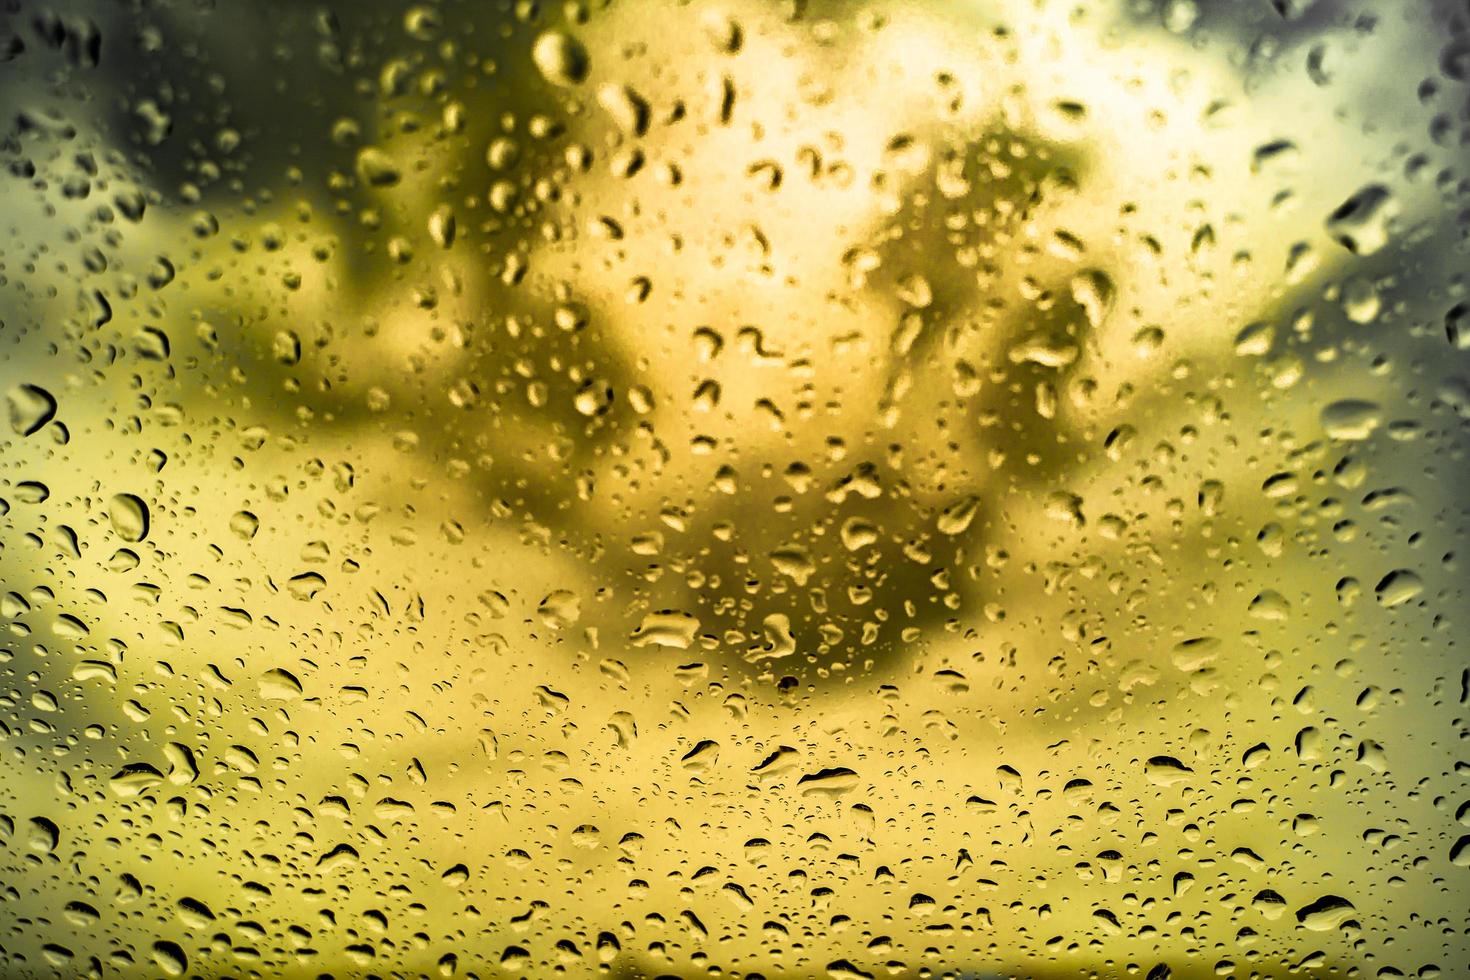 Rain drops on the windshield In the evening when heavy rain.shallow focus effect. photo